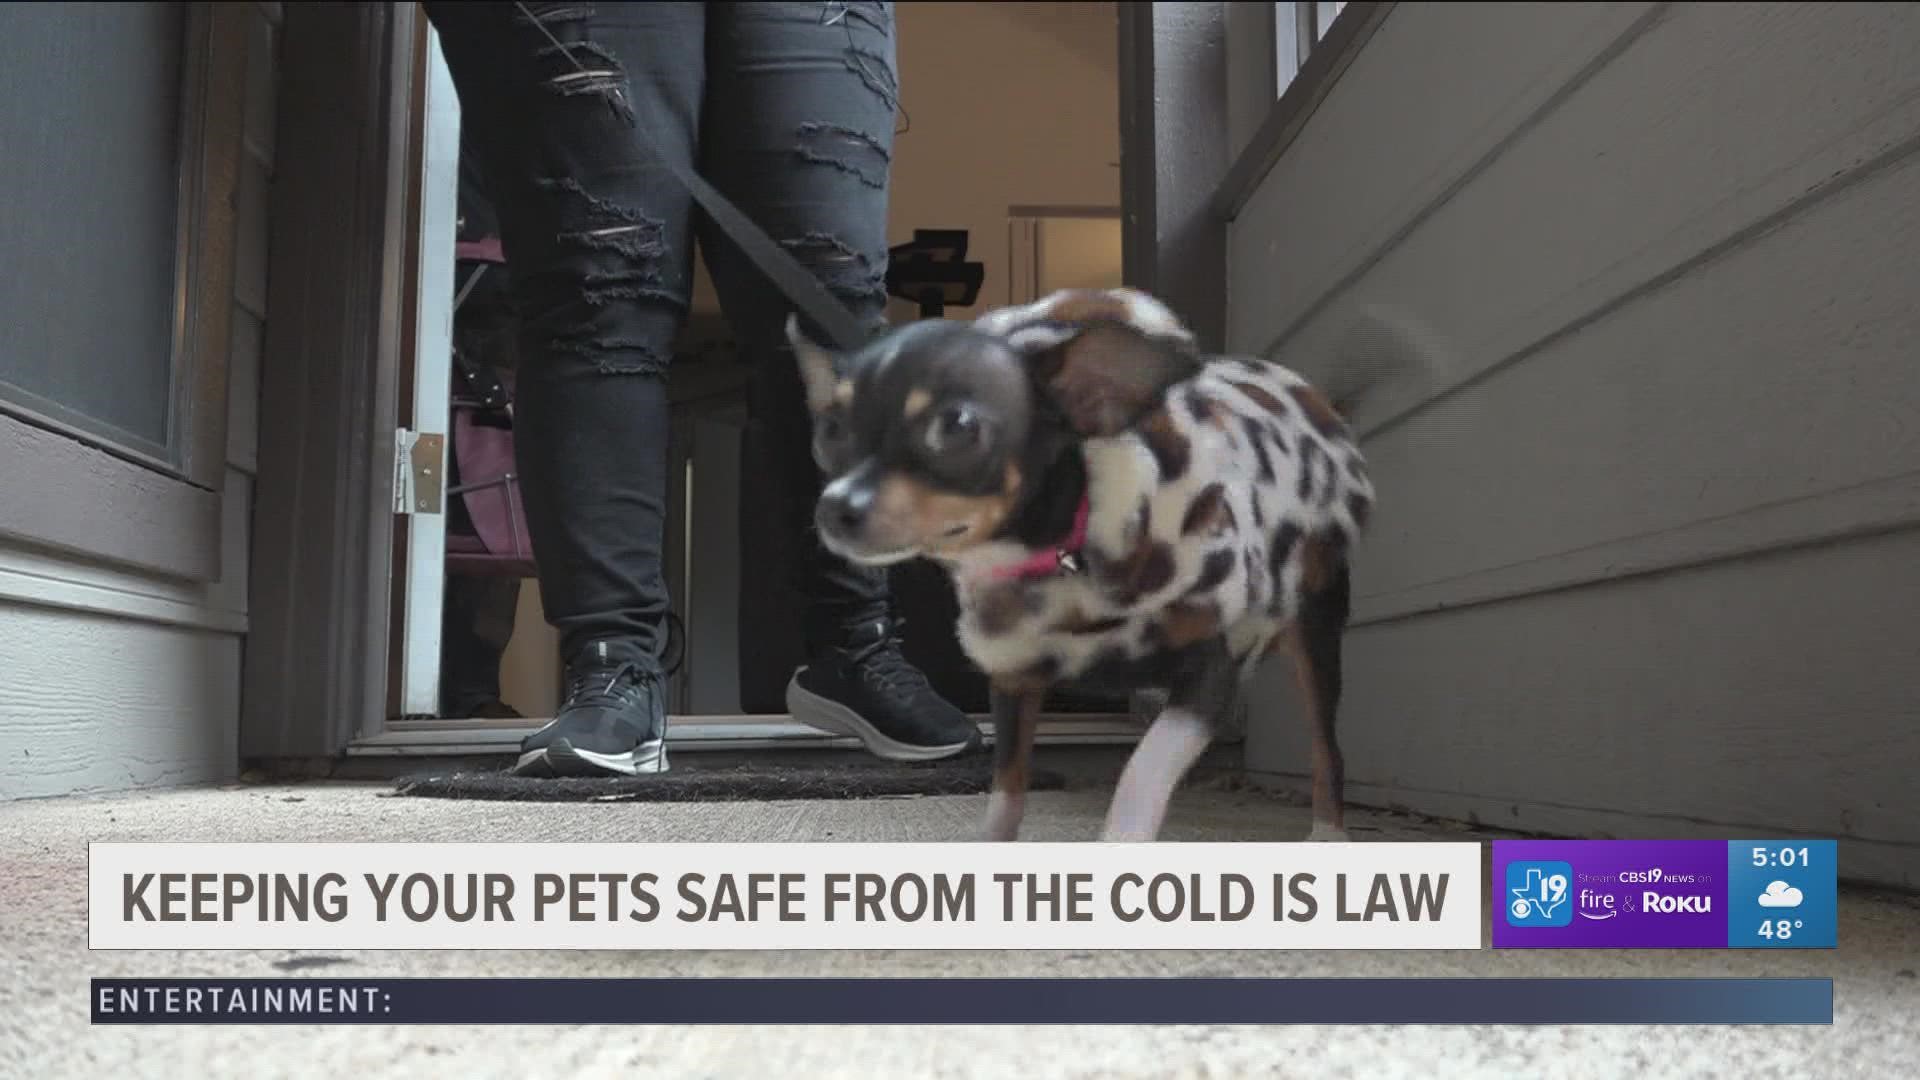 Amid the sub-freezing temperatures, here's how to keep your pets warm